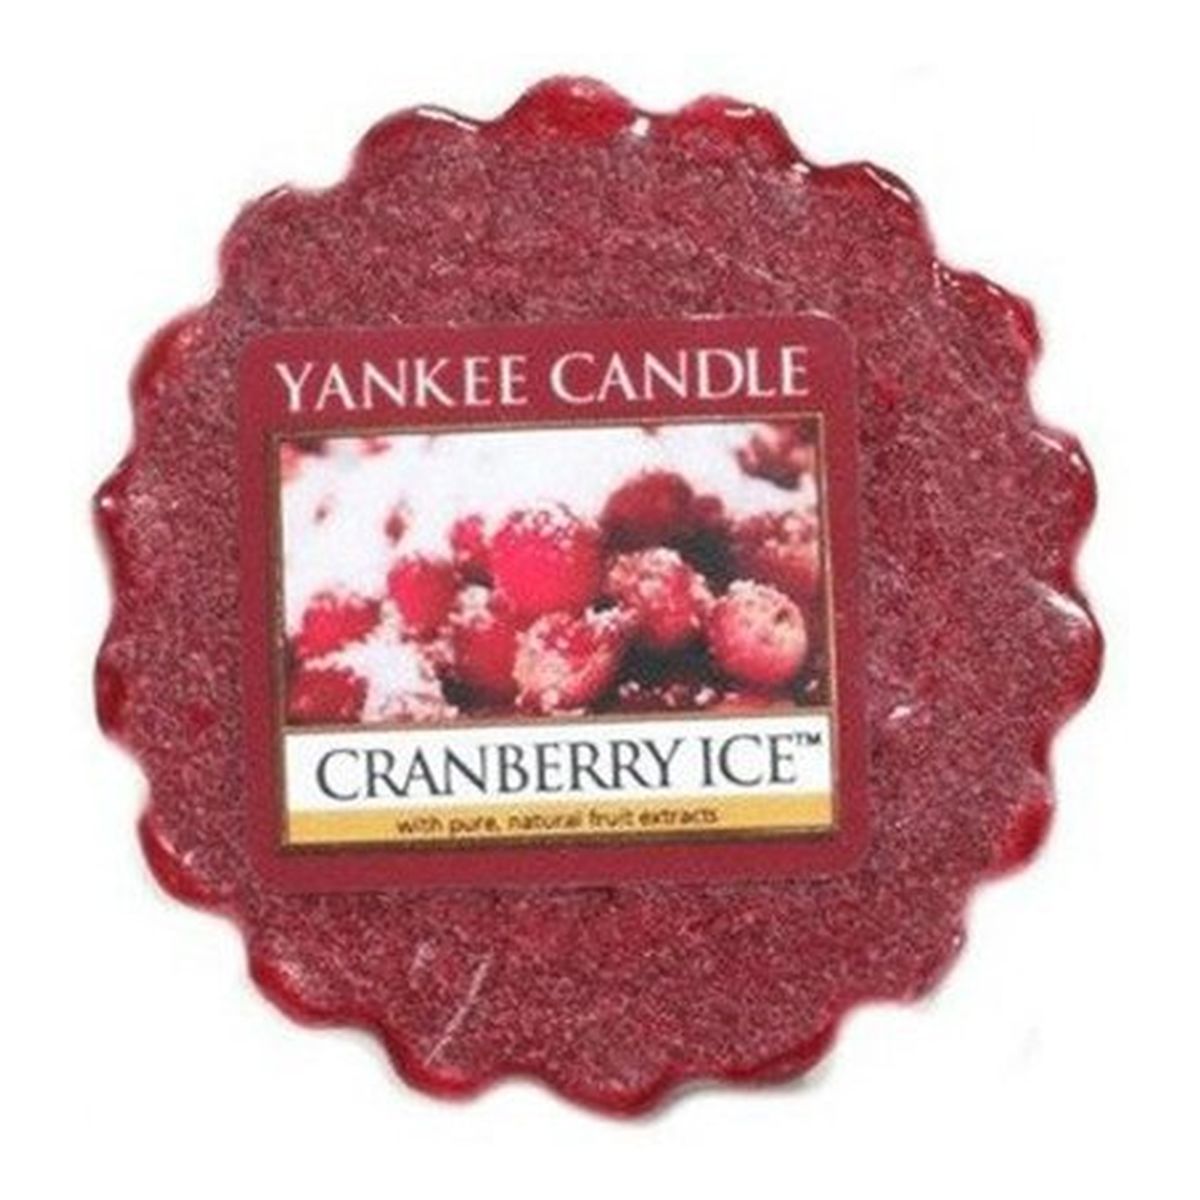 Yankee Candle Wax wosk zapachowy Cranberry Ice 22g